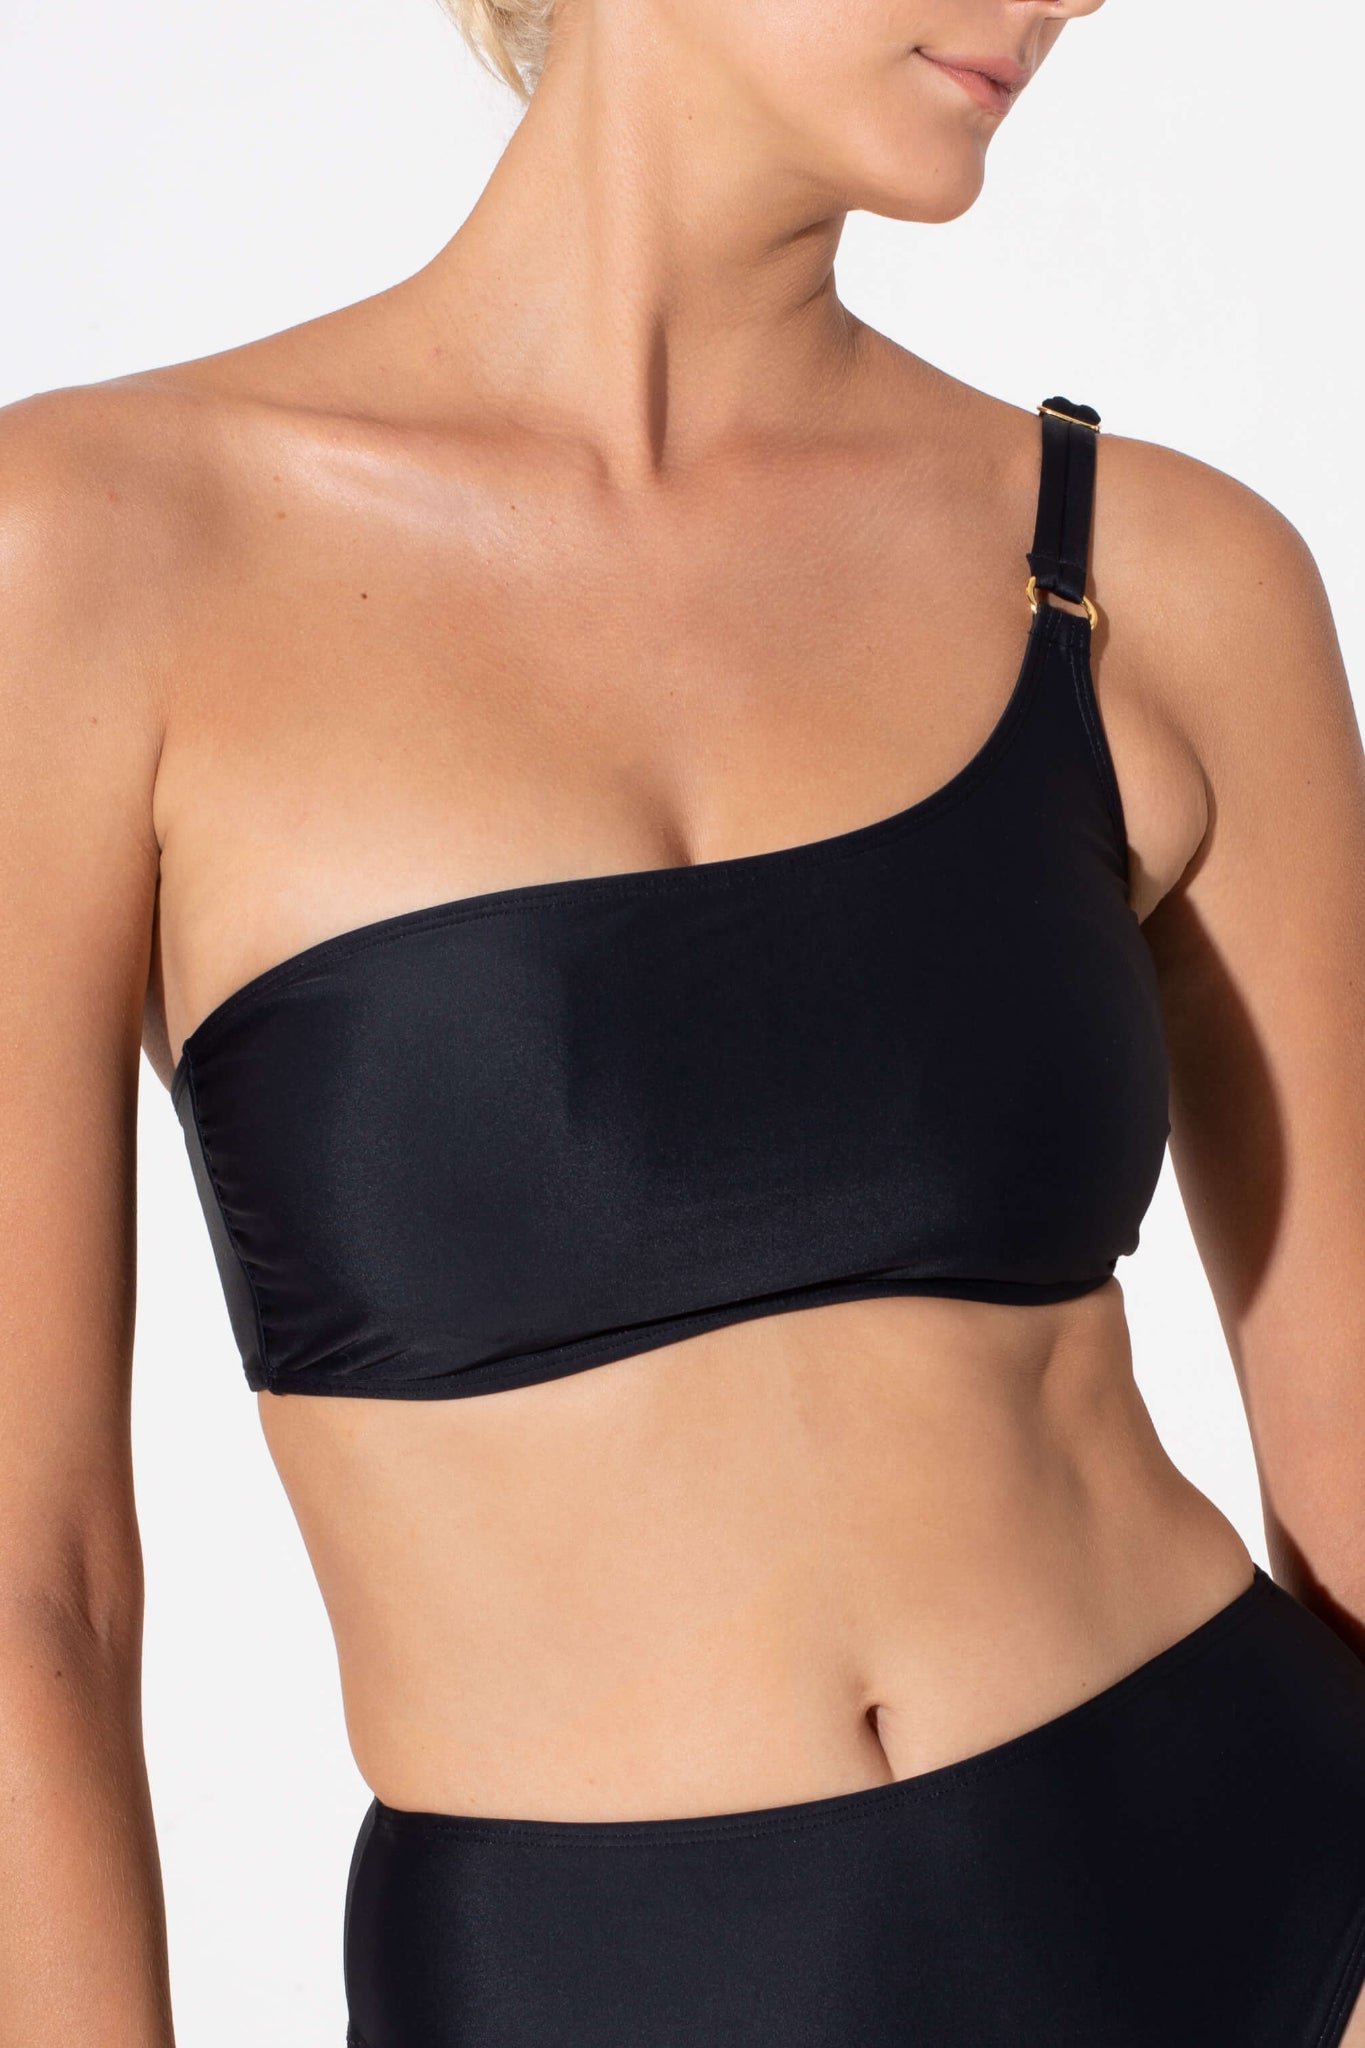 black bikini bra made from sustainable fabrics. Best swimsuit to wear on the beach to play sports